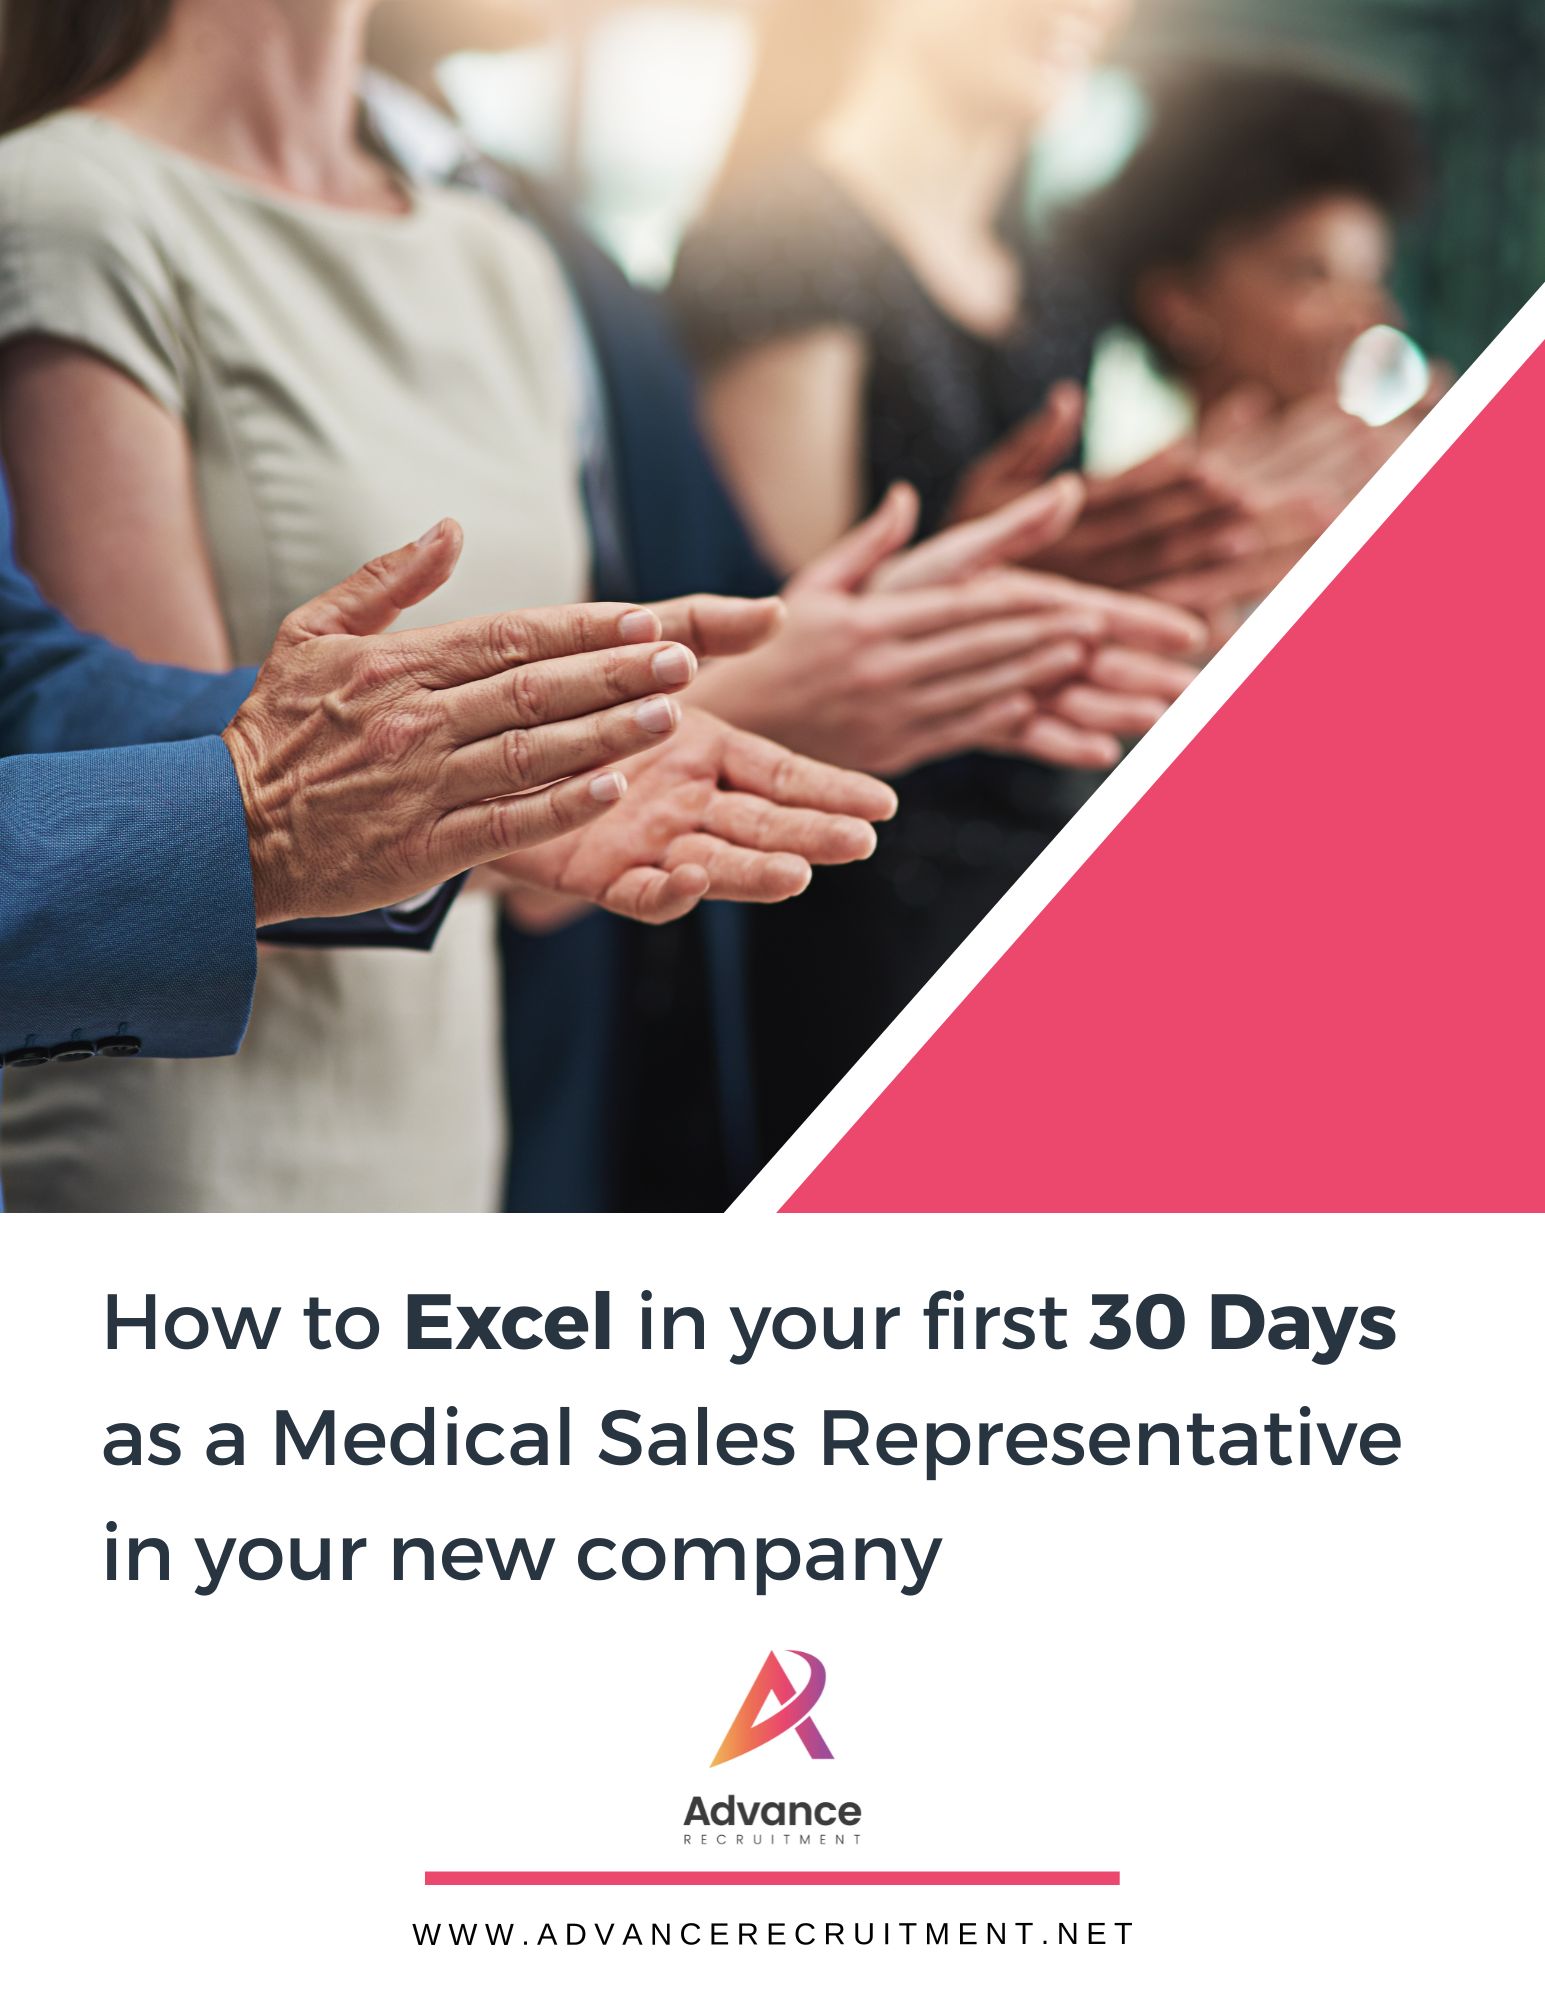 How To Excel In Your First 30 Days As A Medical Sales Representative in Your New Company